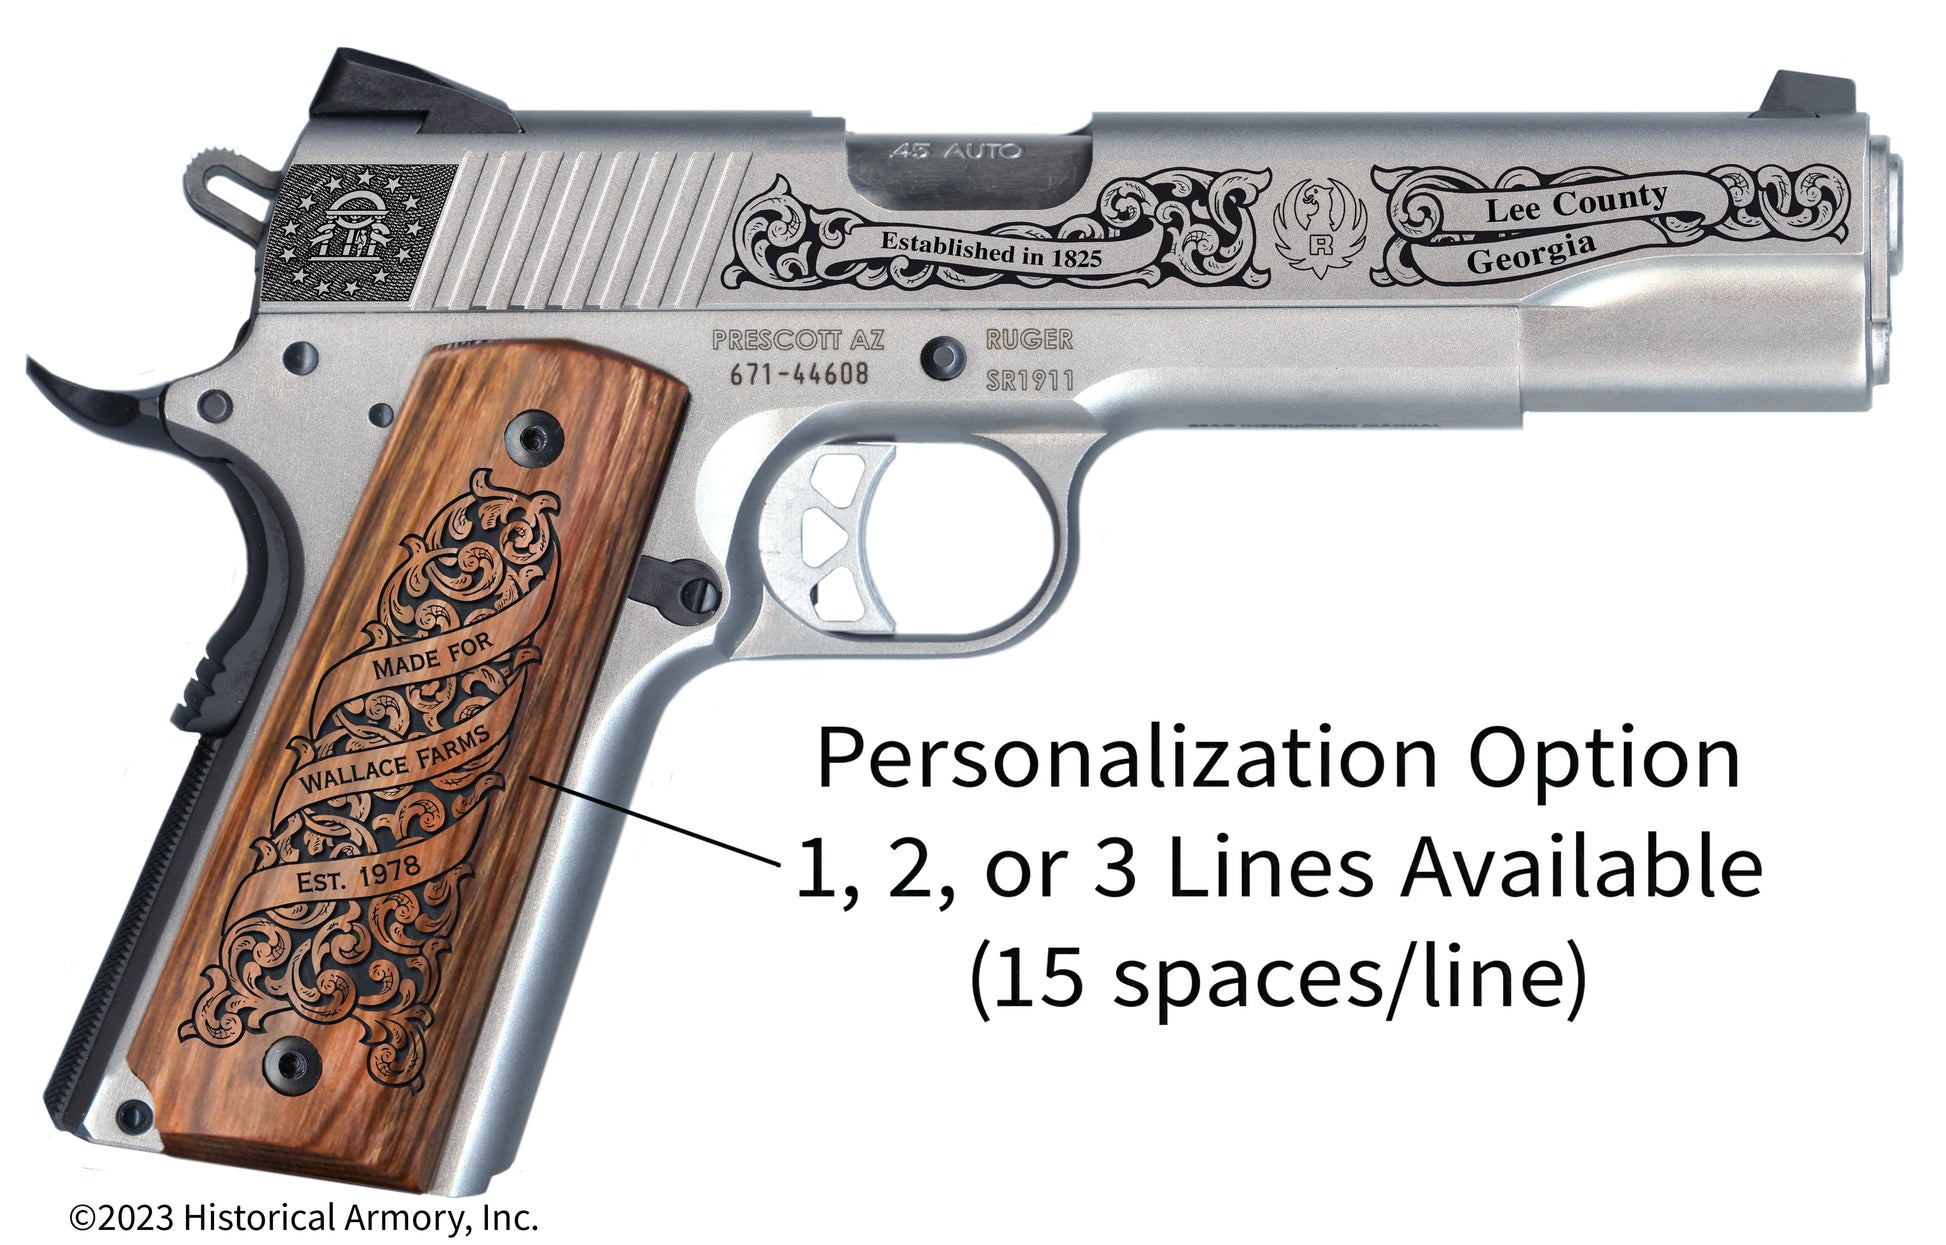 Lee County Georgia Personalized Engraved .45 Auto Ruger 1911